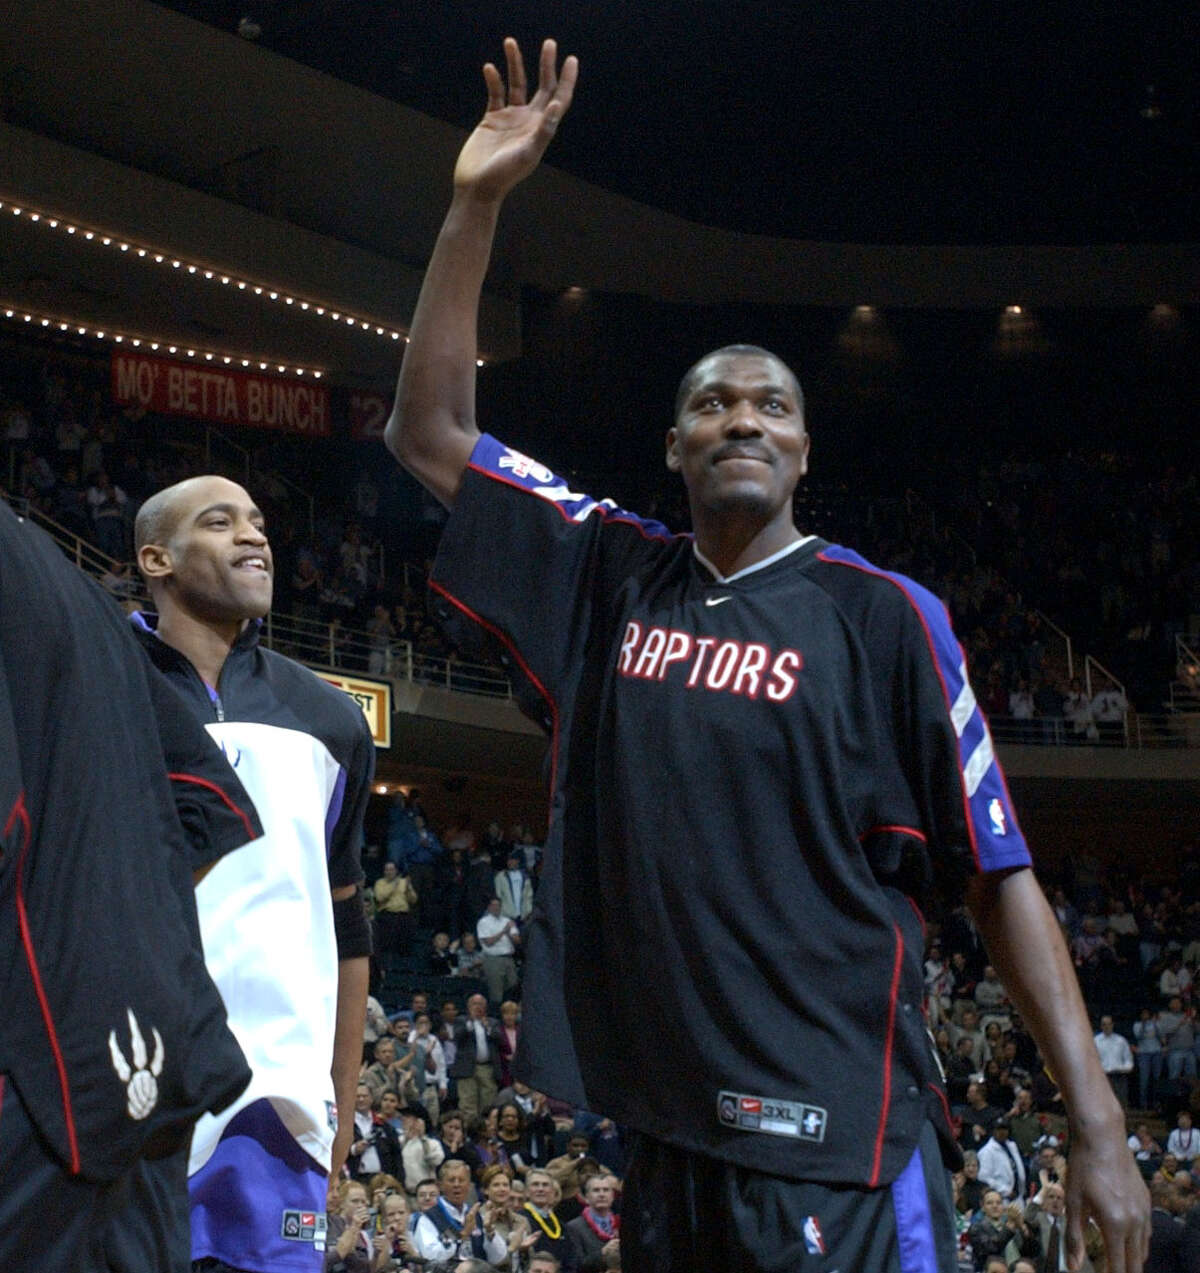 On Aug. 2, 2001, Hakeem Olajuwon was traded by the Rockets to Toronto, where he played his final season in a Raptors uniform Click through the gallery to see other stars who ended their careers in strange uniforms.